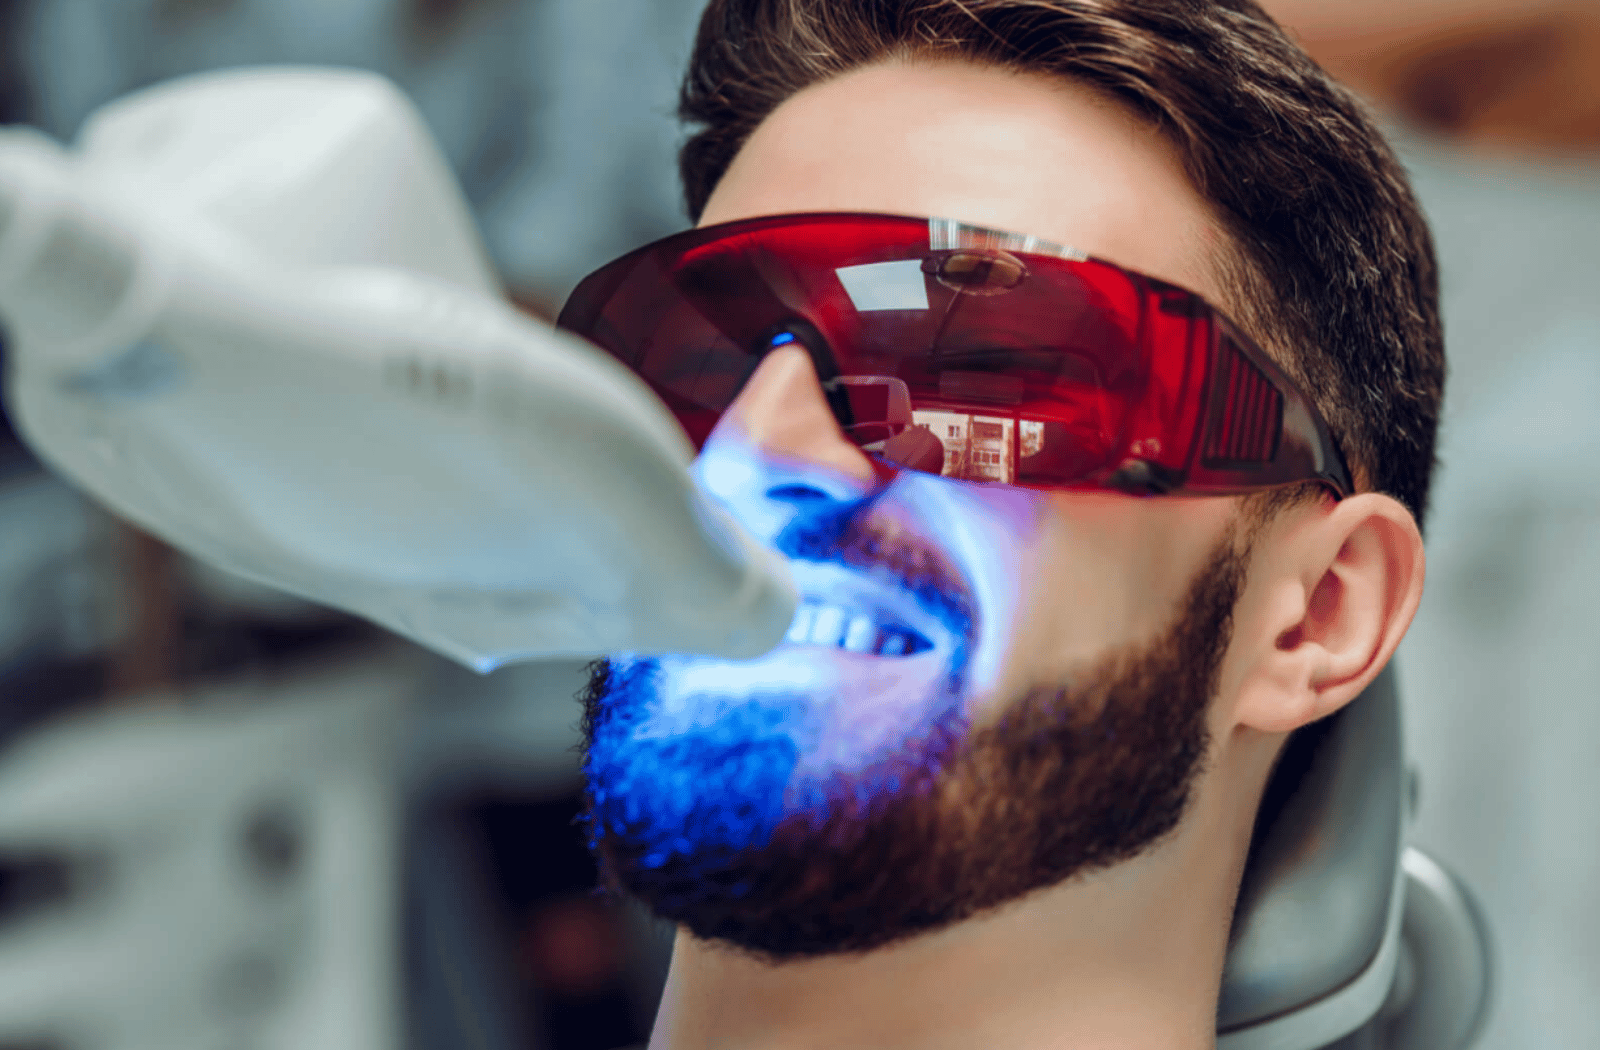 A man in a dentist's office wearing specialty red wraparound glasses to protect his eyes from UV rays being projected from a device in front of his mouth and on to his teeth during a teeth whitening procedure.